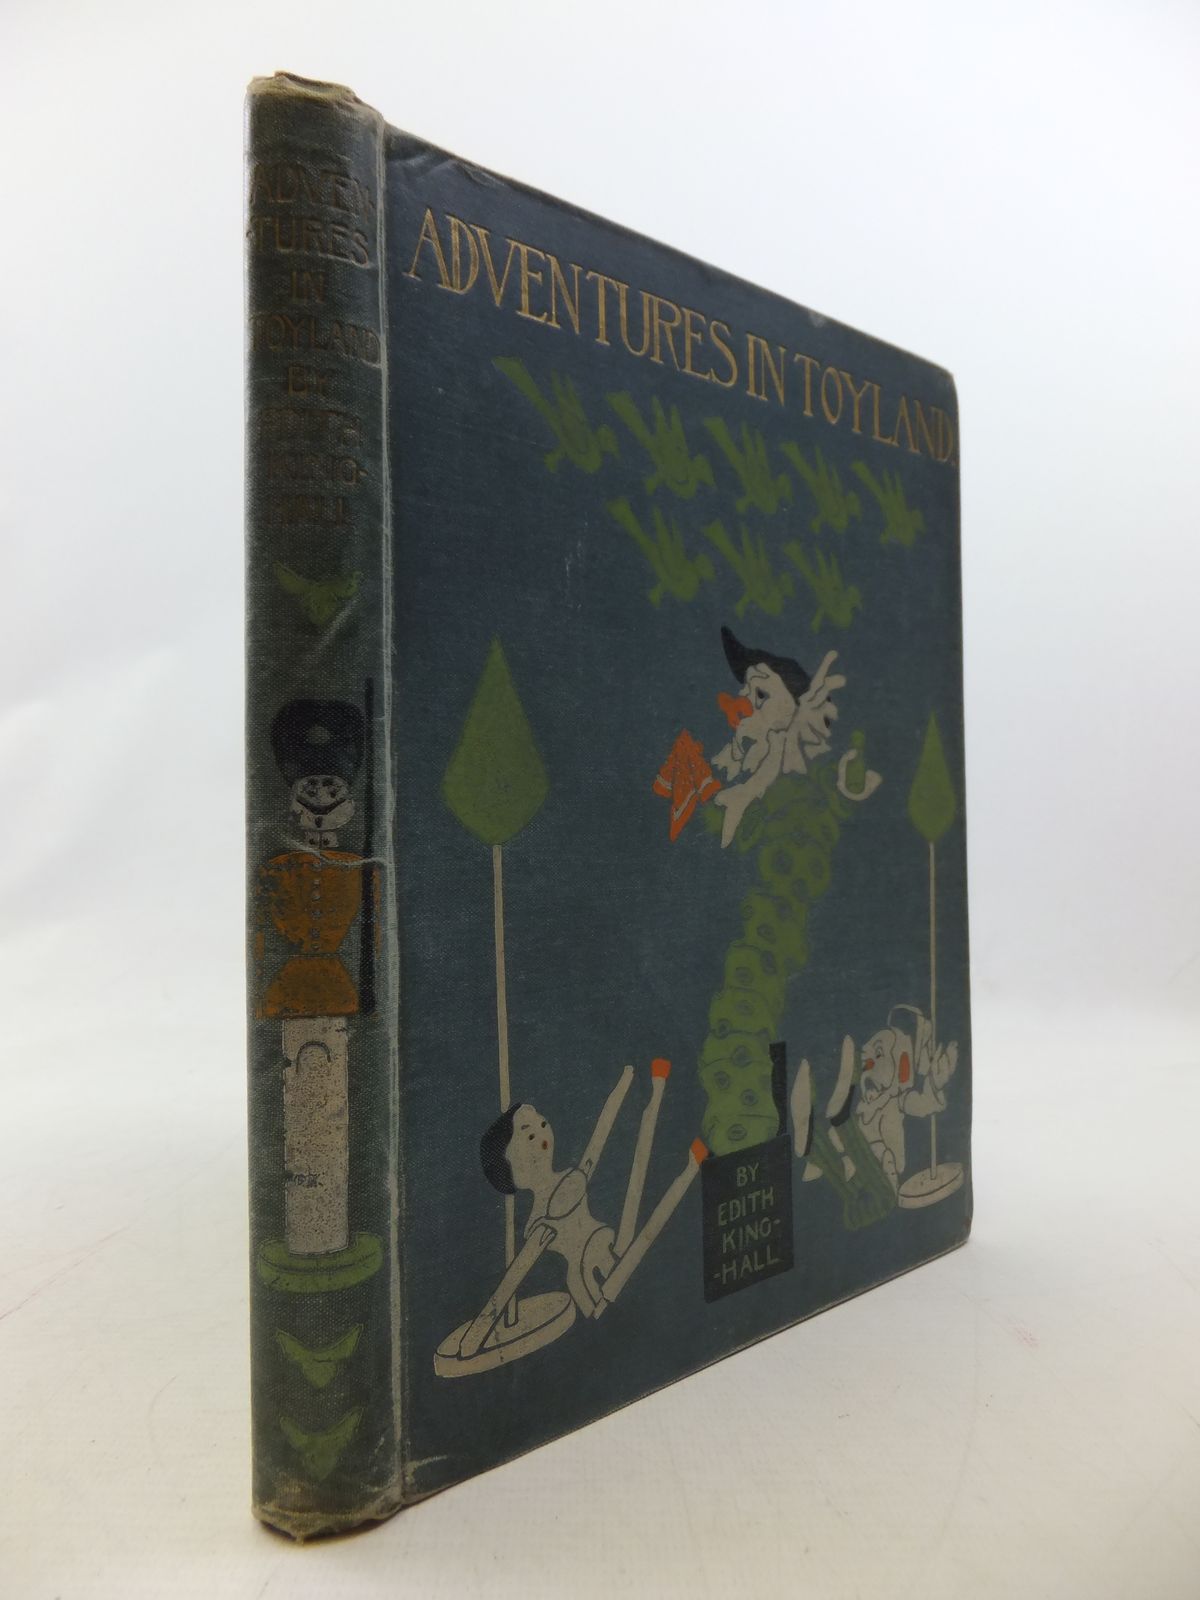 Photo of ADVENTURES IN TOYLAND written by Hall, Edith King illustrated by Woodward, Alice B. published by Blackie & Son Ltd. (STOCK CODE: 1109459)  for sale by Stella & Rose's Books